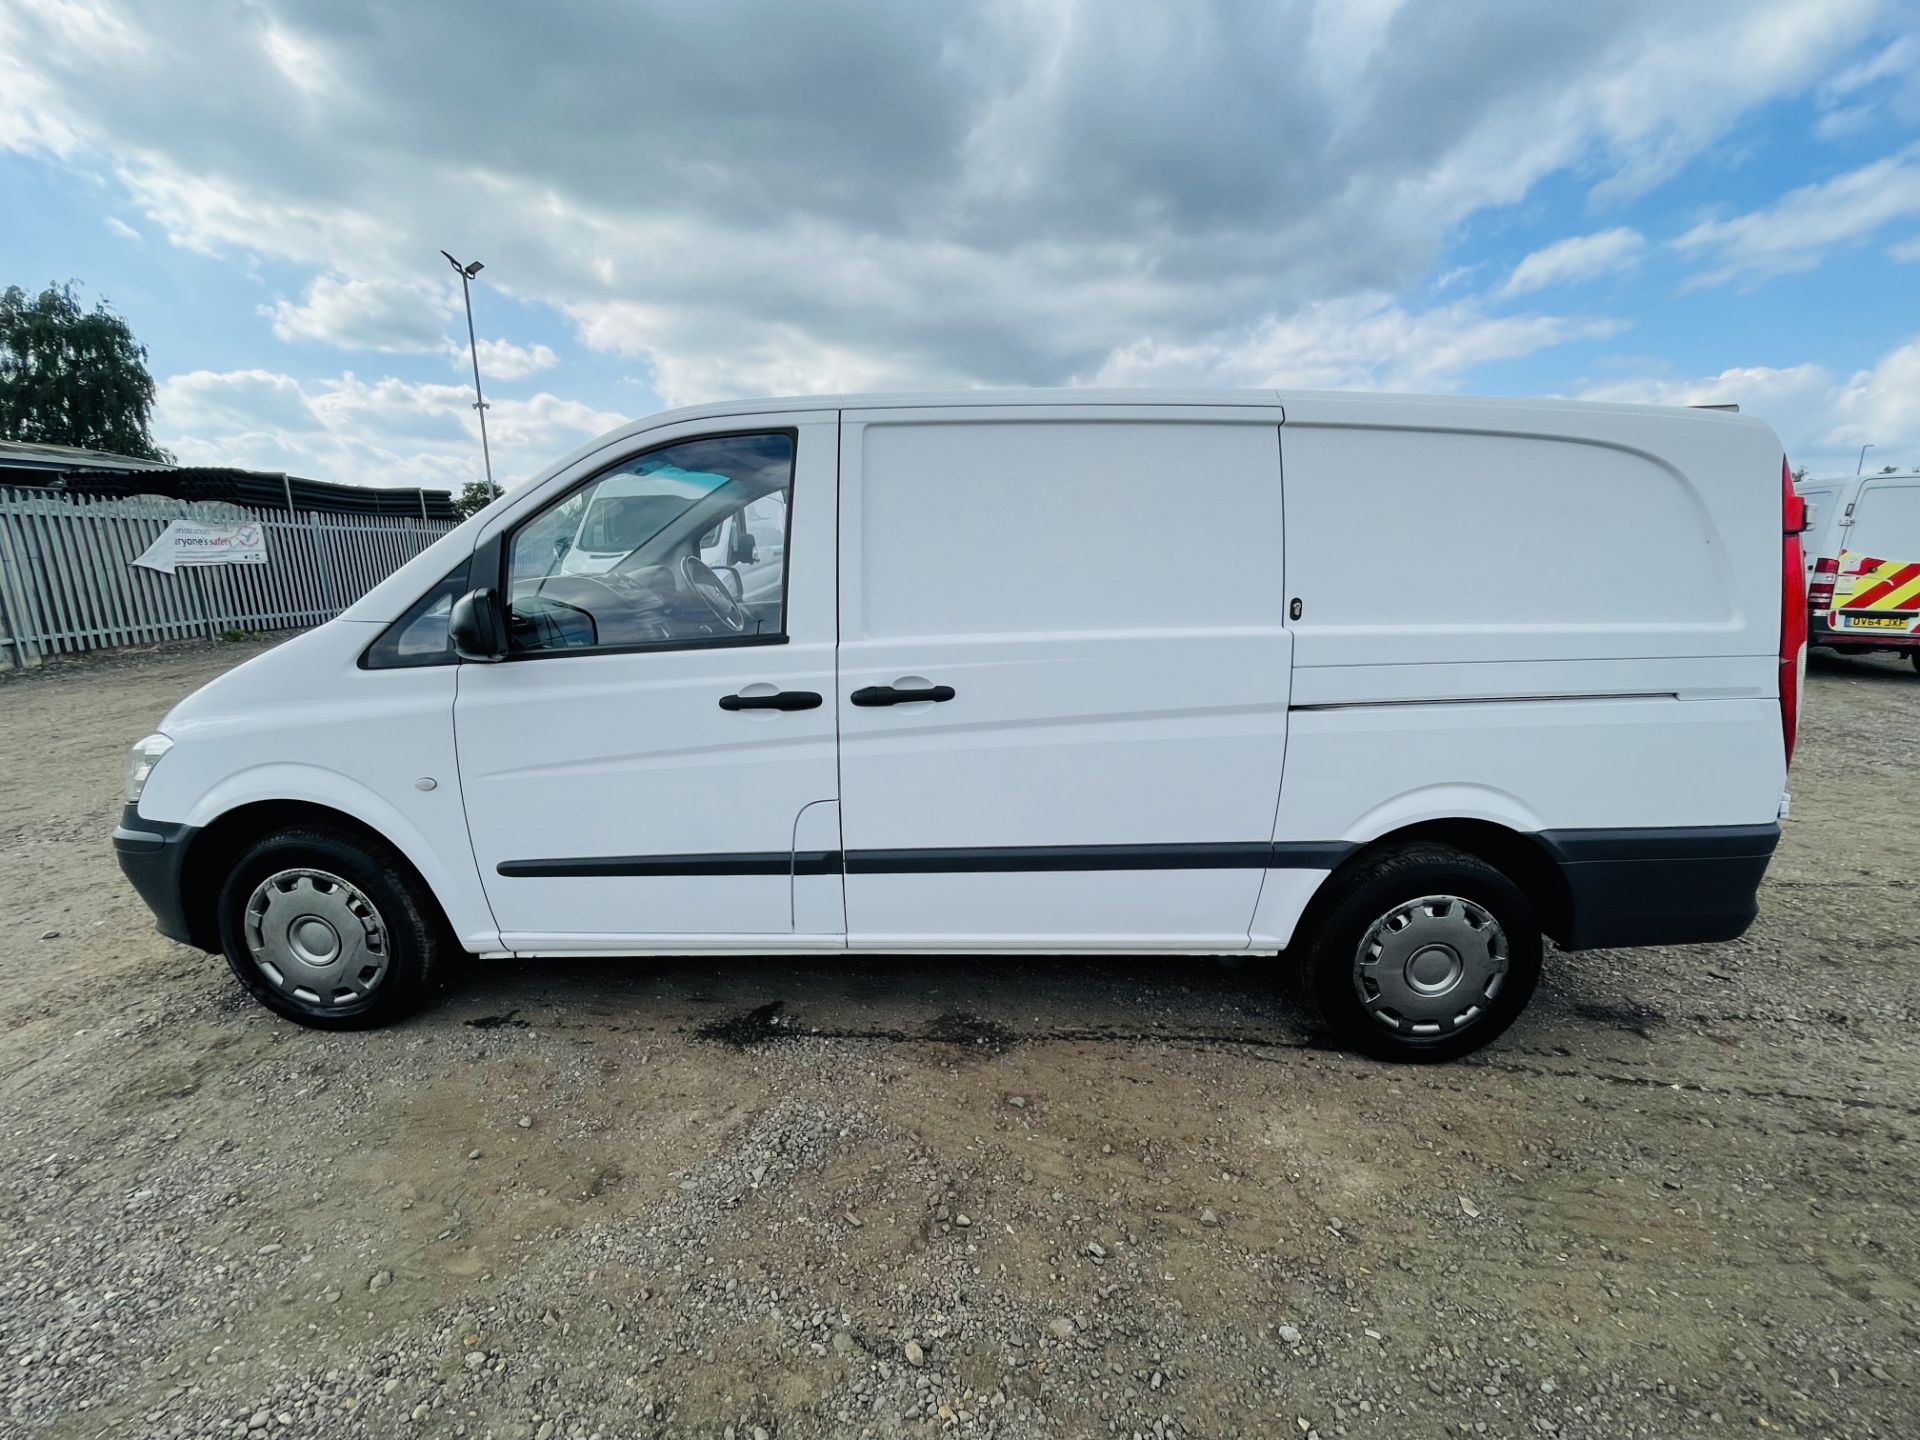 ** ON SALE ** Mercedes-Benz Vito 2.1 113 CDI Long Low Roof - 2014 '14 Reg' - Cruise Control - - Image 5 of 17